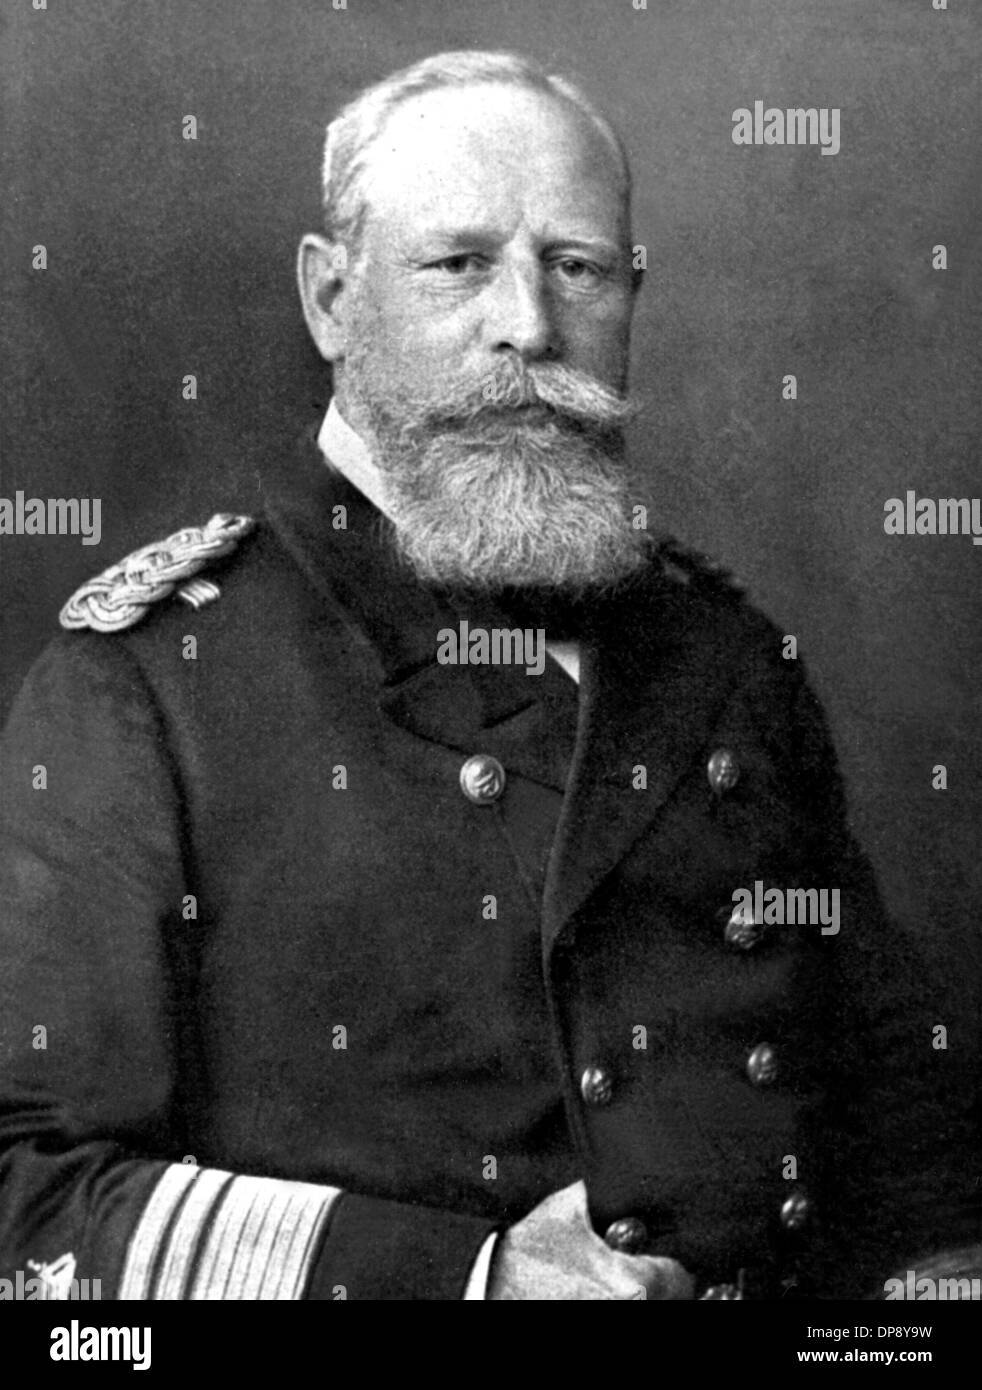 Admiral Henning von Holtzendorff in a contemporary picture. As member of the Prussian navy (from 1869 on) he gathered experience amongst others in Cameroon and East Asia. He became chief of the deep sea fleet in 1910 and took over the naval staff in the headquarters in 1915. He was appointed Grand Admiral shortly before leaving the navy in 1918. Henning von Holtzendorff was born on the 9th of January in 1853 in Prenzlau and died on the 7th of June in 1919 in Jagow (Uckermark). Stock Photo